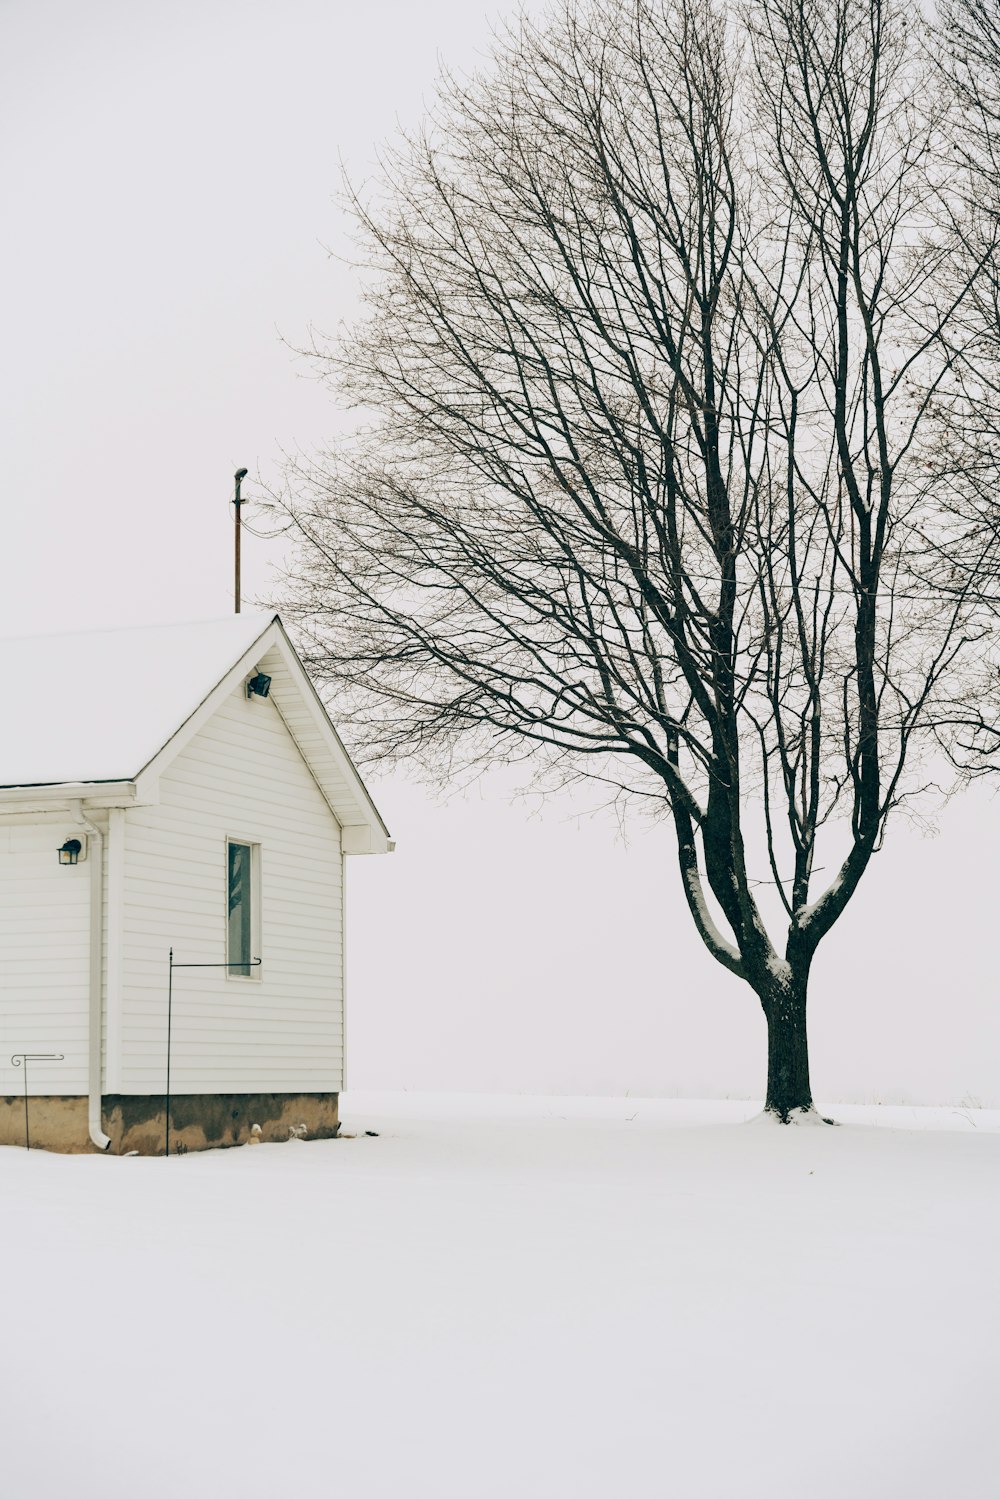 a small white church with a tree in front of it